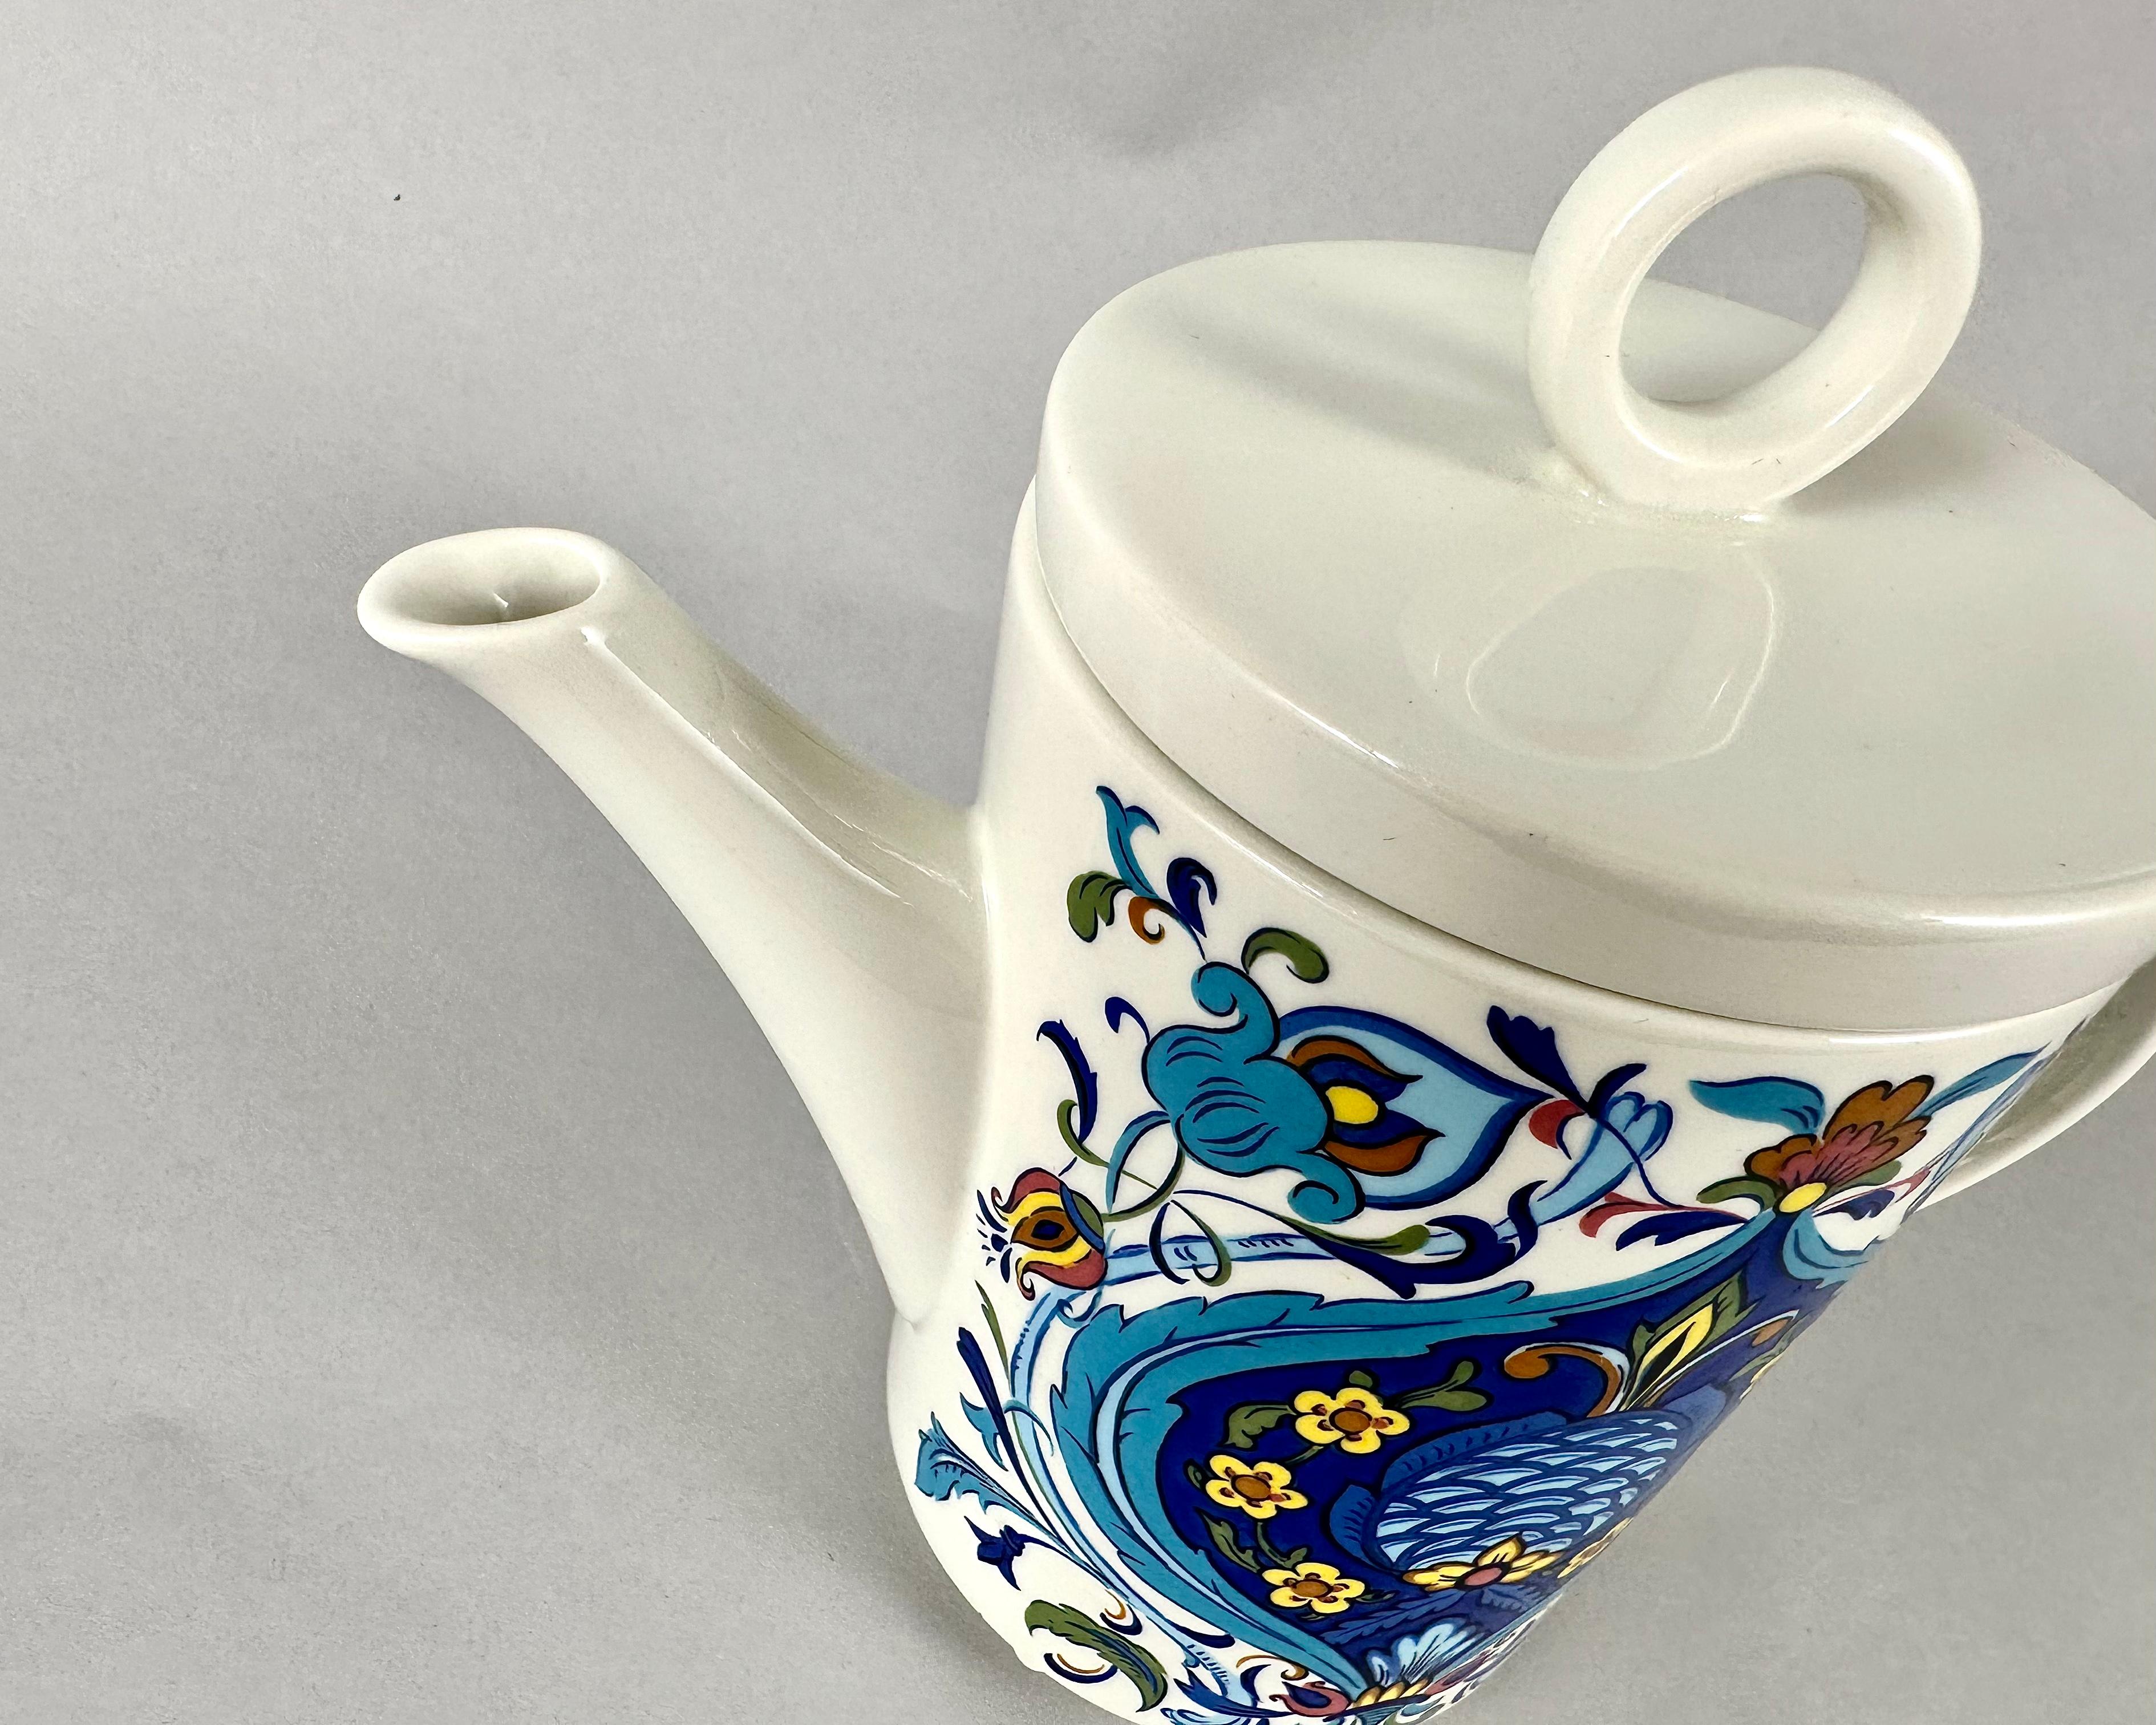 Villeroy & Boch Izmir Collection Coffee Pot in Vitro Porcelain. 

Rare edition.

Porcelain coffee pot or teapot with Izmir pattern made by Villeroy & Boch of Luxembourg in 1973.

The cylindrical teapot is adorned on both sides with simple flower